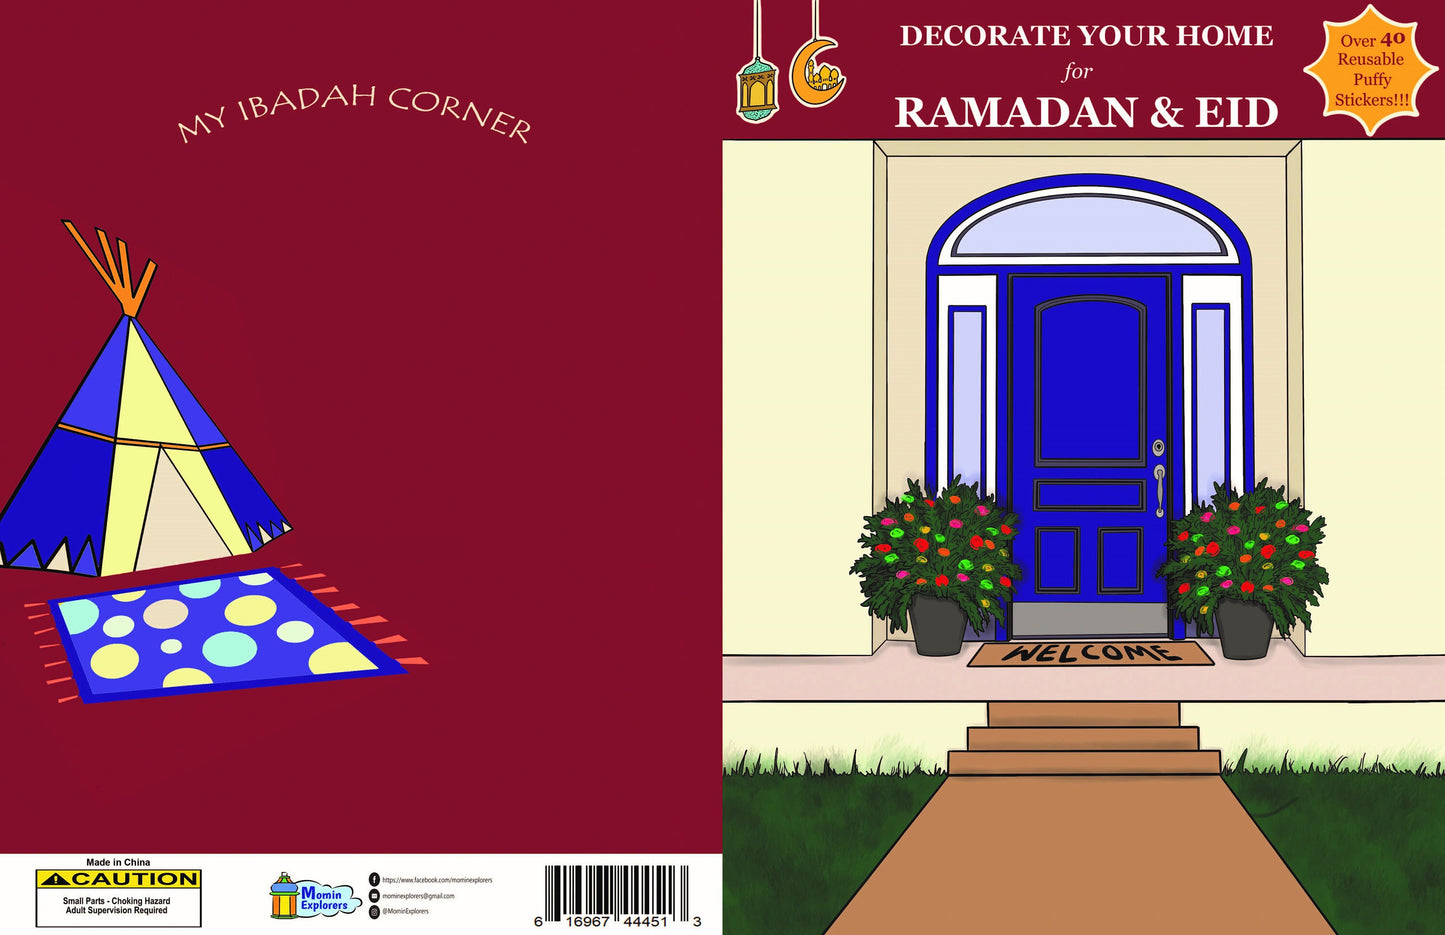 Decorate Your Home For Ramadan and Eid - Reusable Sticker Kit